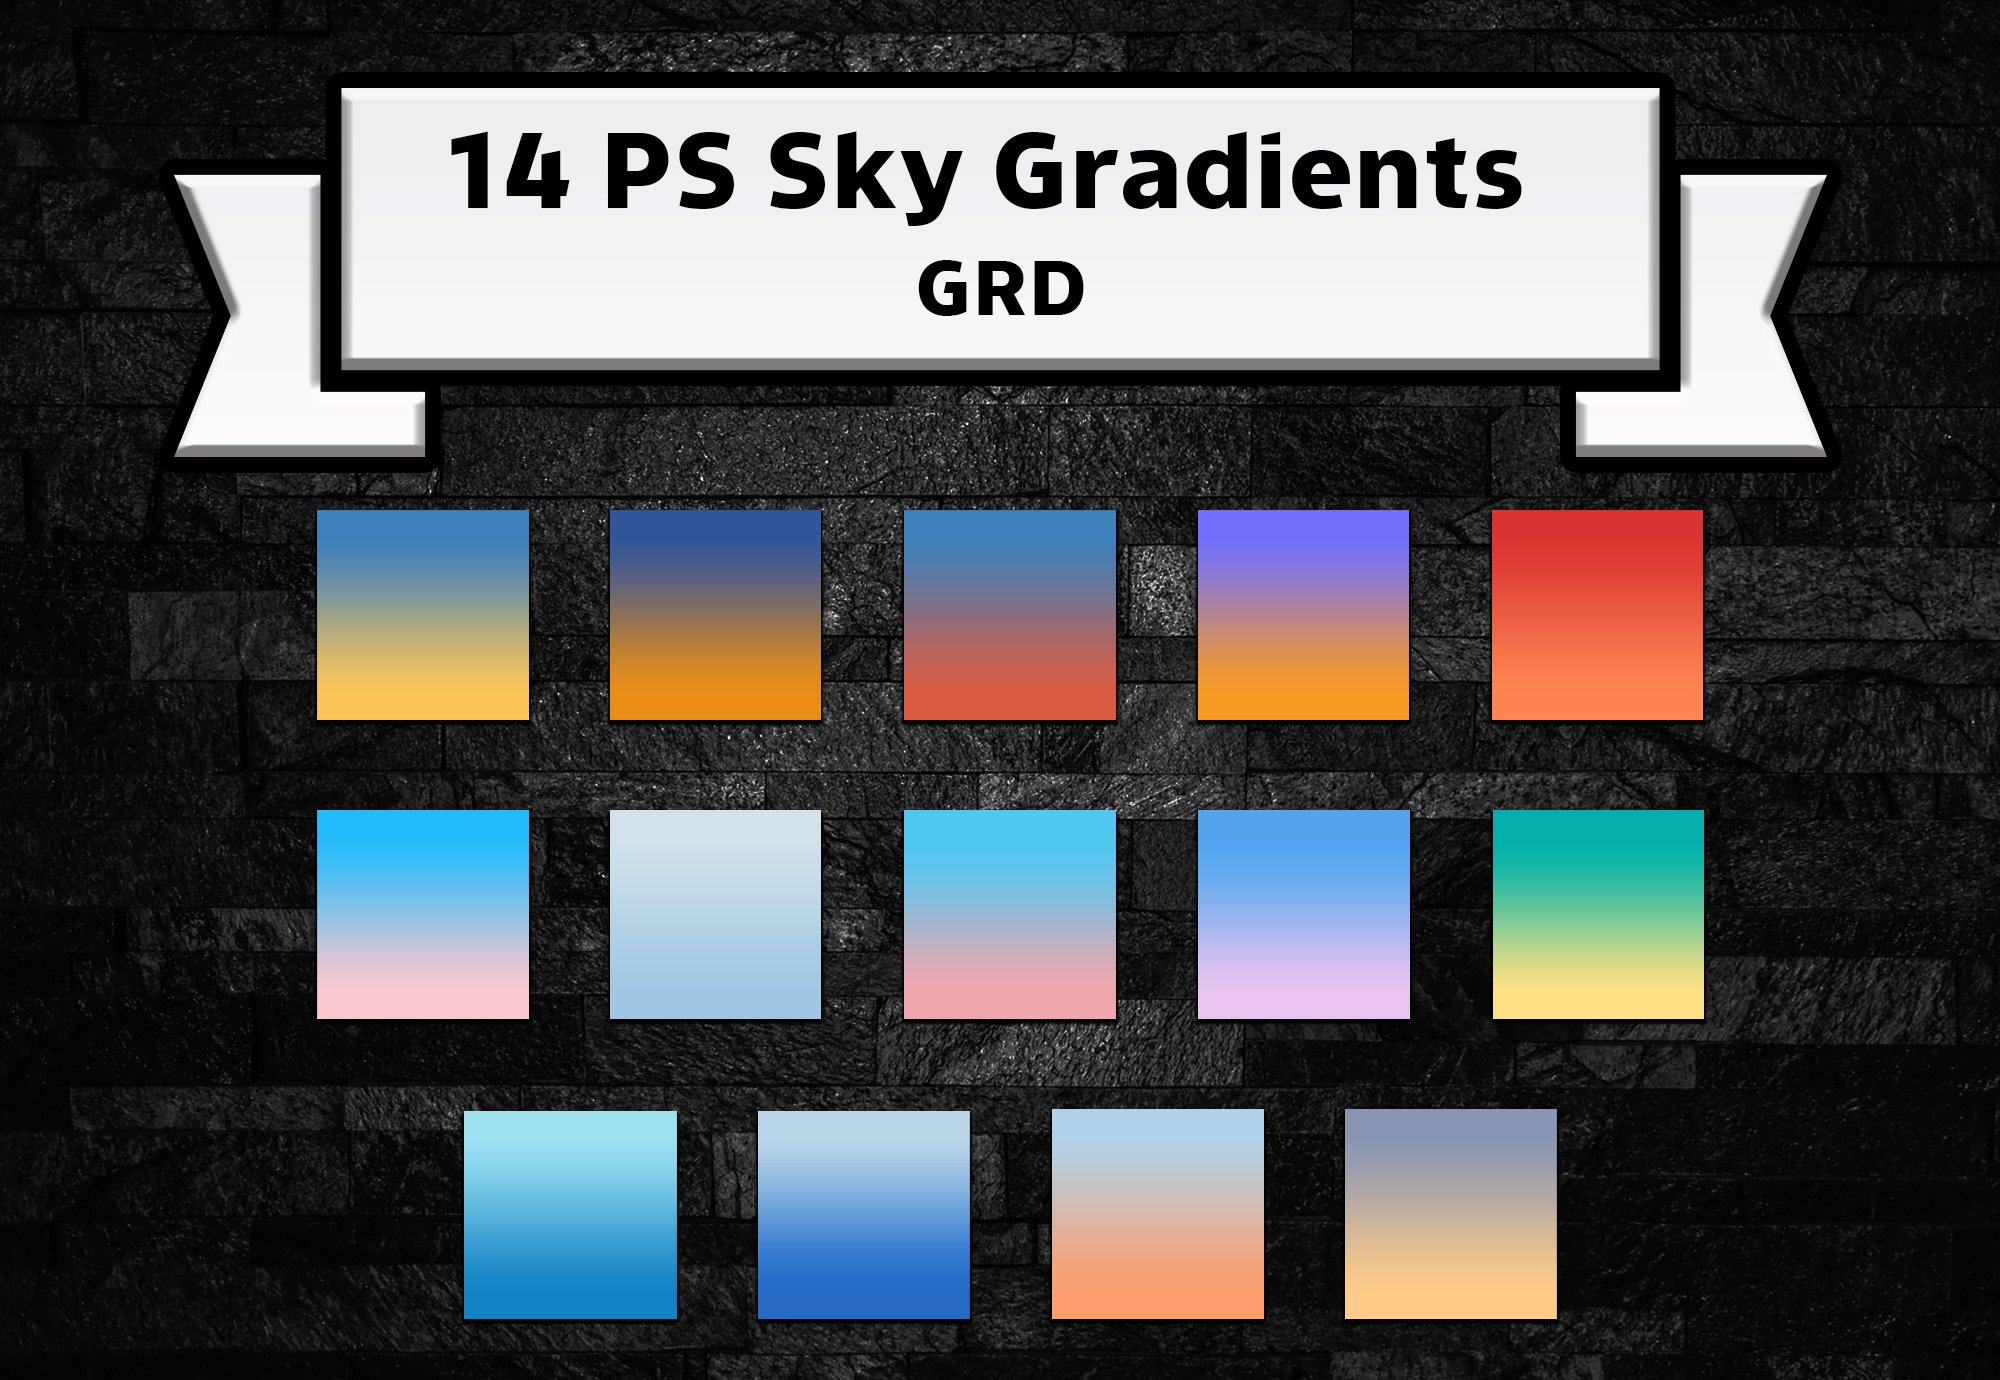 Photoshop sky gradients GRDcover image.